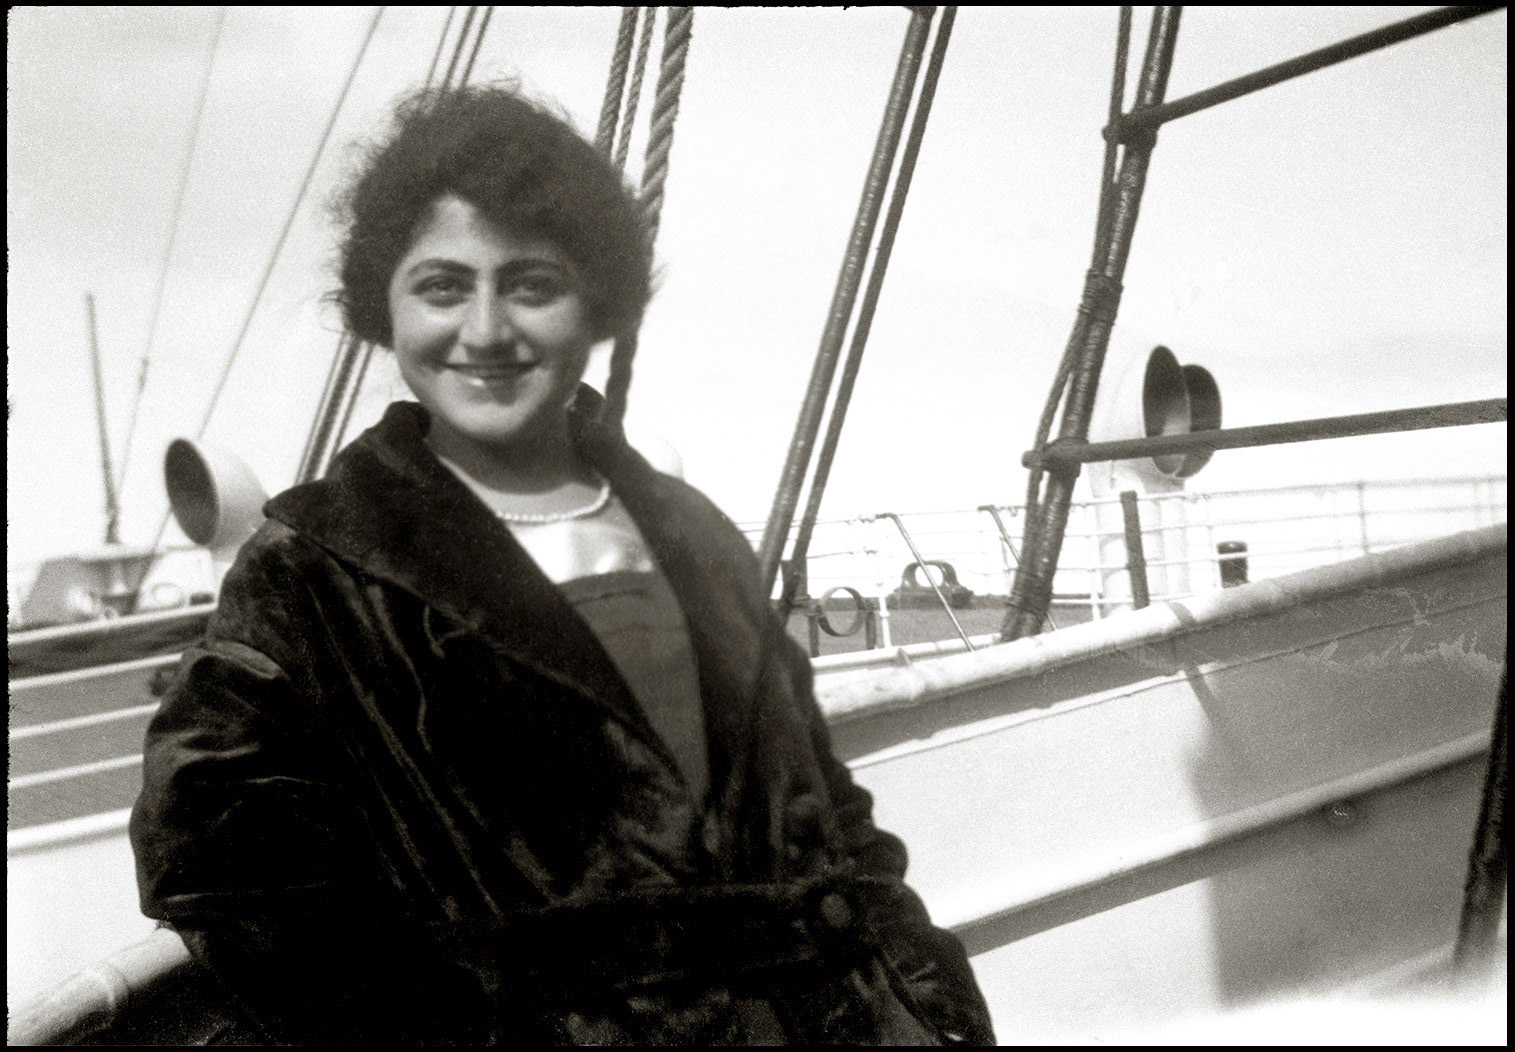 Mary Jorjorian (1900 - 1979), sailing aboard the S.S. Mohawk from Jacksonville, Florida, back home to New York City, April 4, 1921. The photo was taken on Mary's medium-format Brownie camera by an unknown shipmate. Mary, age 20, had been living in Jacksonville for five months to assist her older sister deliver and care for her second child. Here she is returning alone. As buoyant as she appears, Mary is at this moment quite lovesick. She fell in love in Jacksonville with a family friend, Daniel Eliseian, who then departed for Buenos Aires.

Mary was an Armenian, born in Sivas, Turkey, but arrived in America with her family as a baby in 1901. Her family was poor but cultured. Mary attended Wadleigh High School, New York's first public secondary school for girls. She was a self-described "progressive modern woman." She wanted to attend Hunter College, to become a teacher or social worker, but family finances kept her sidelined. She remained an avid reader and independent learner, though, throughout her life. While in Jacksonville, she was reading Margaret Sanger's "Women and the New Race." She was also a big fan of movie pictures, catching multiple photoplays each week, especially those which featured strong or dynamic women.

She played the piano with some skill, and worked out a duet with Daniel (who was an even better violinist) of the piece, "Meditation" from Massenet's opera, "Thais." Mary started up a correspondence with Daniel in Buenos Aires, where he stayed for three long years, becoming a master tailor. But in June 1924, he returned. They married and settled in Oakland, California, where their grandchildren still live. Mary and Daniel are my wife's maternal grandparents. This photo is from Mary's box of negatives. View full size.